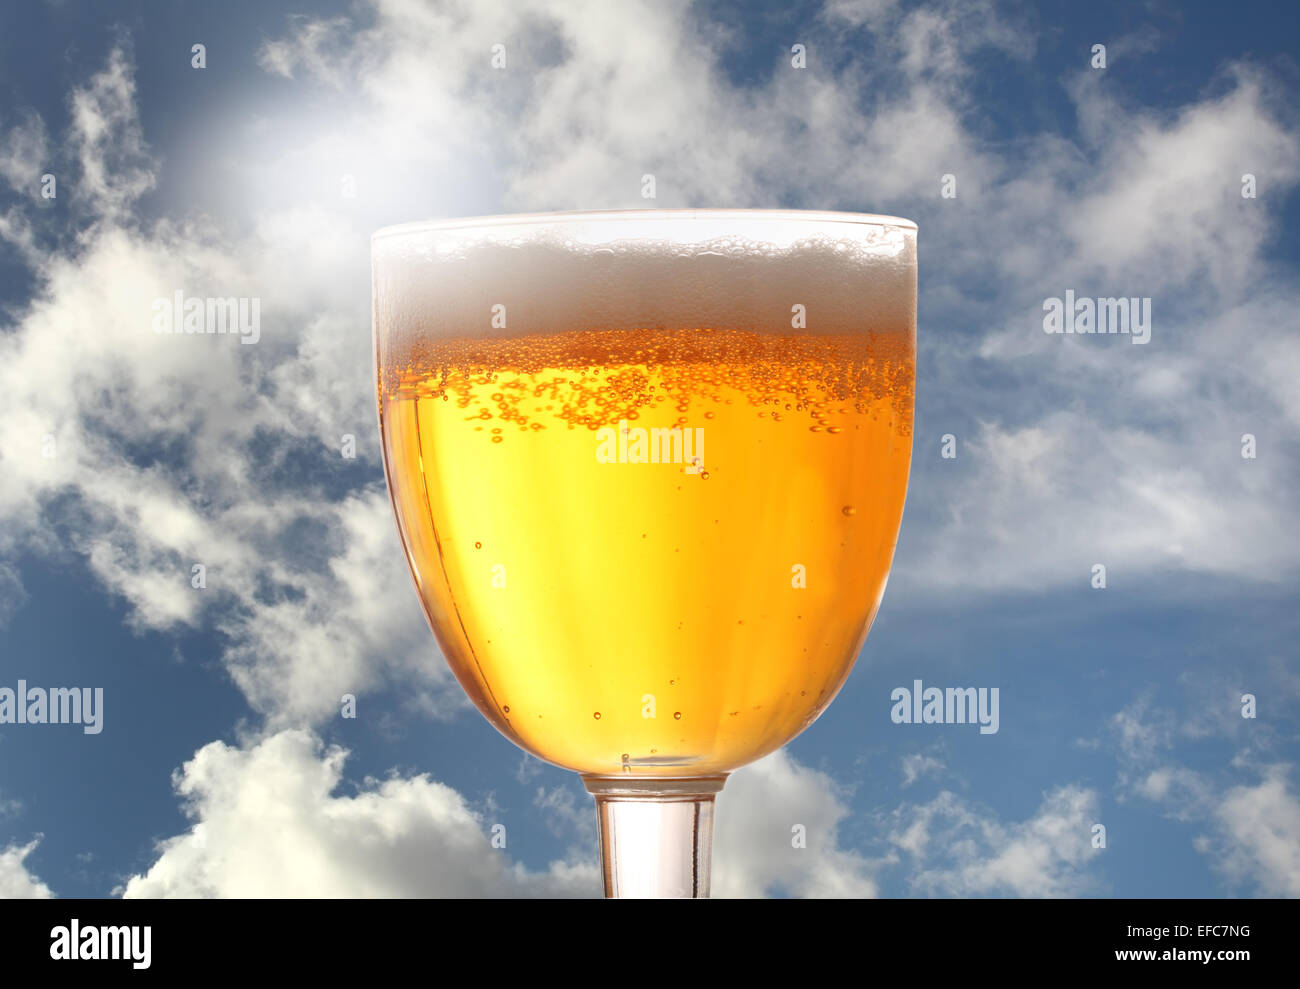 A glass of beer against a sunny blue sky with light clouds Stock Photo